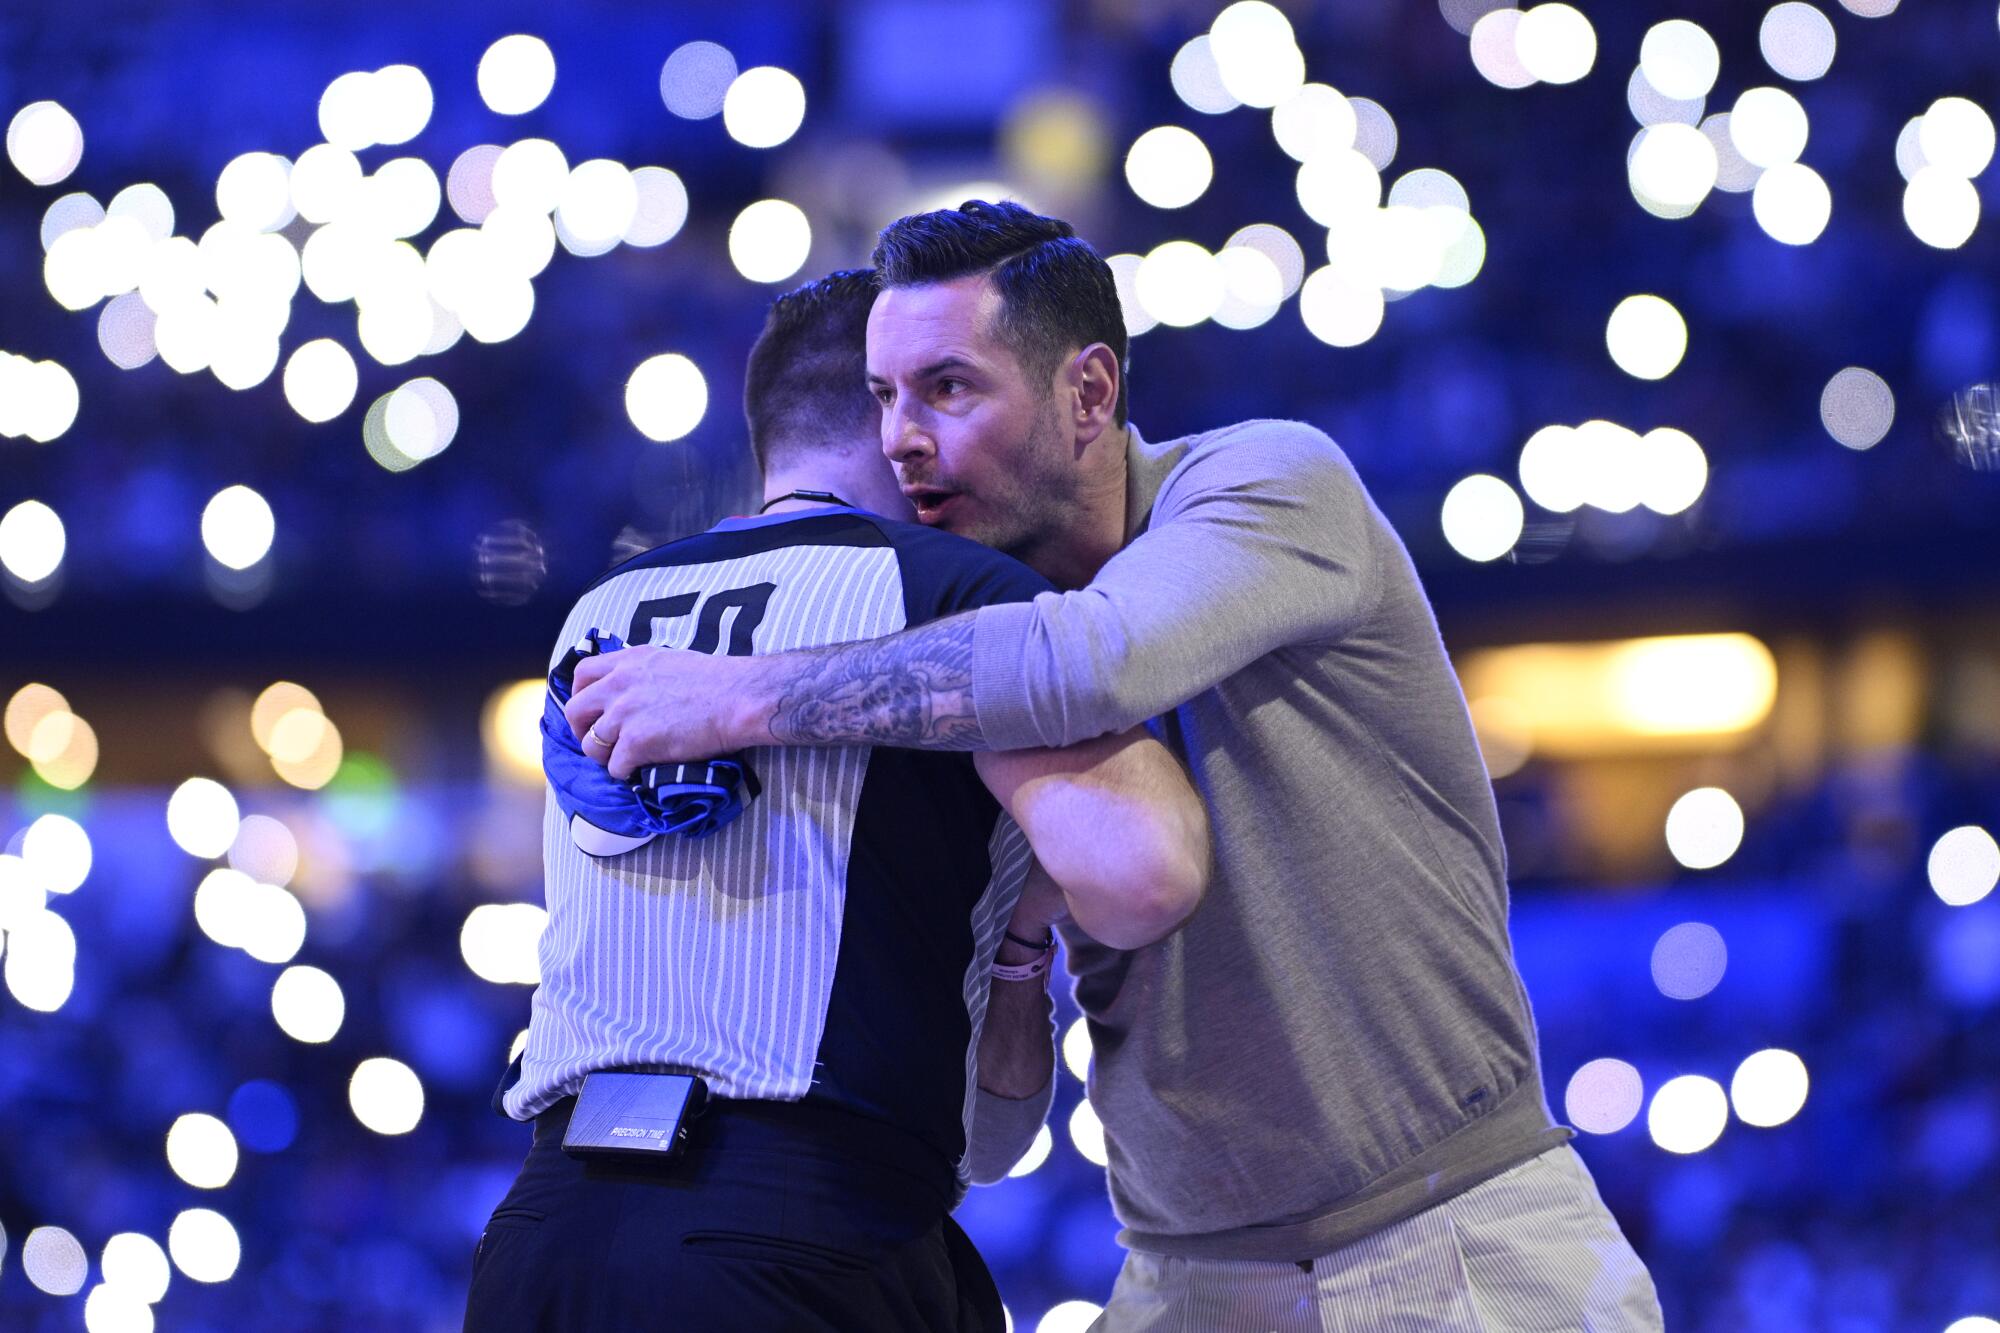 Former Magic guard JJ Redick, right, and official Gediminas Petraitis greet each other on the court during a game in Orlando.